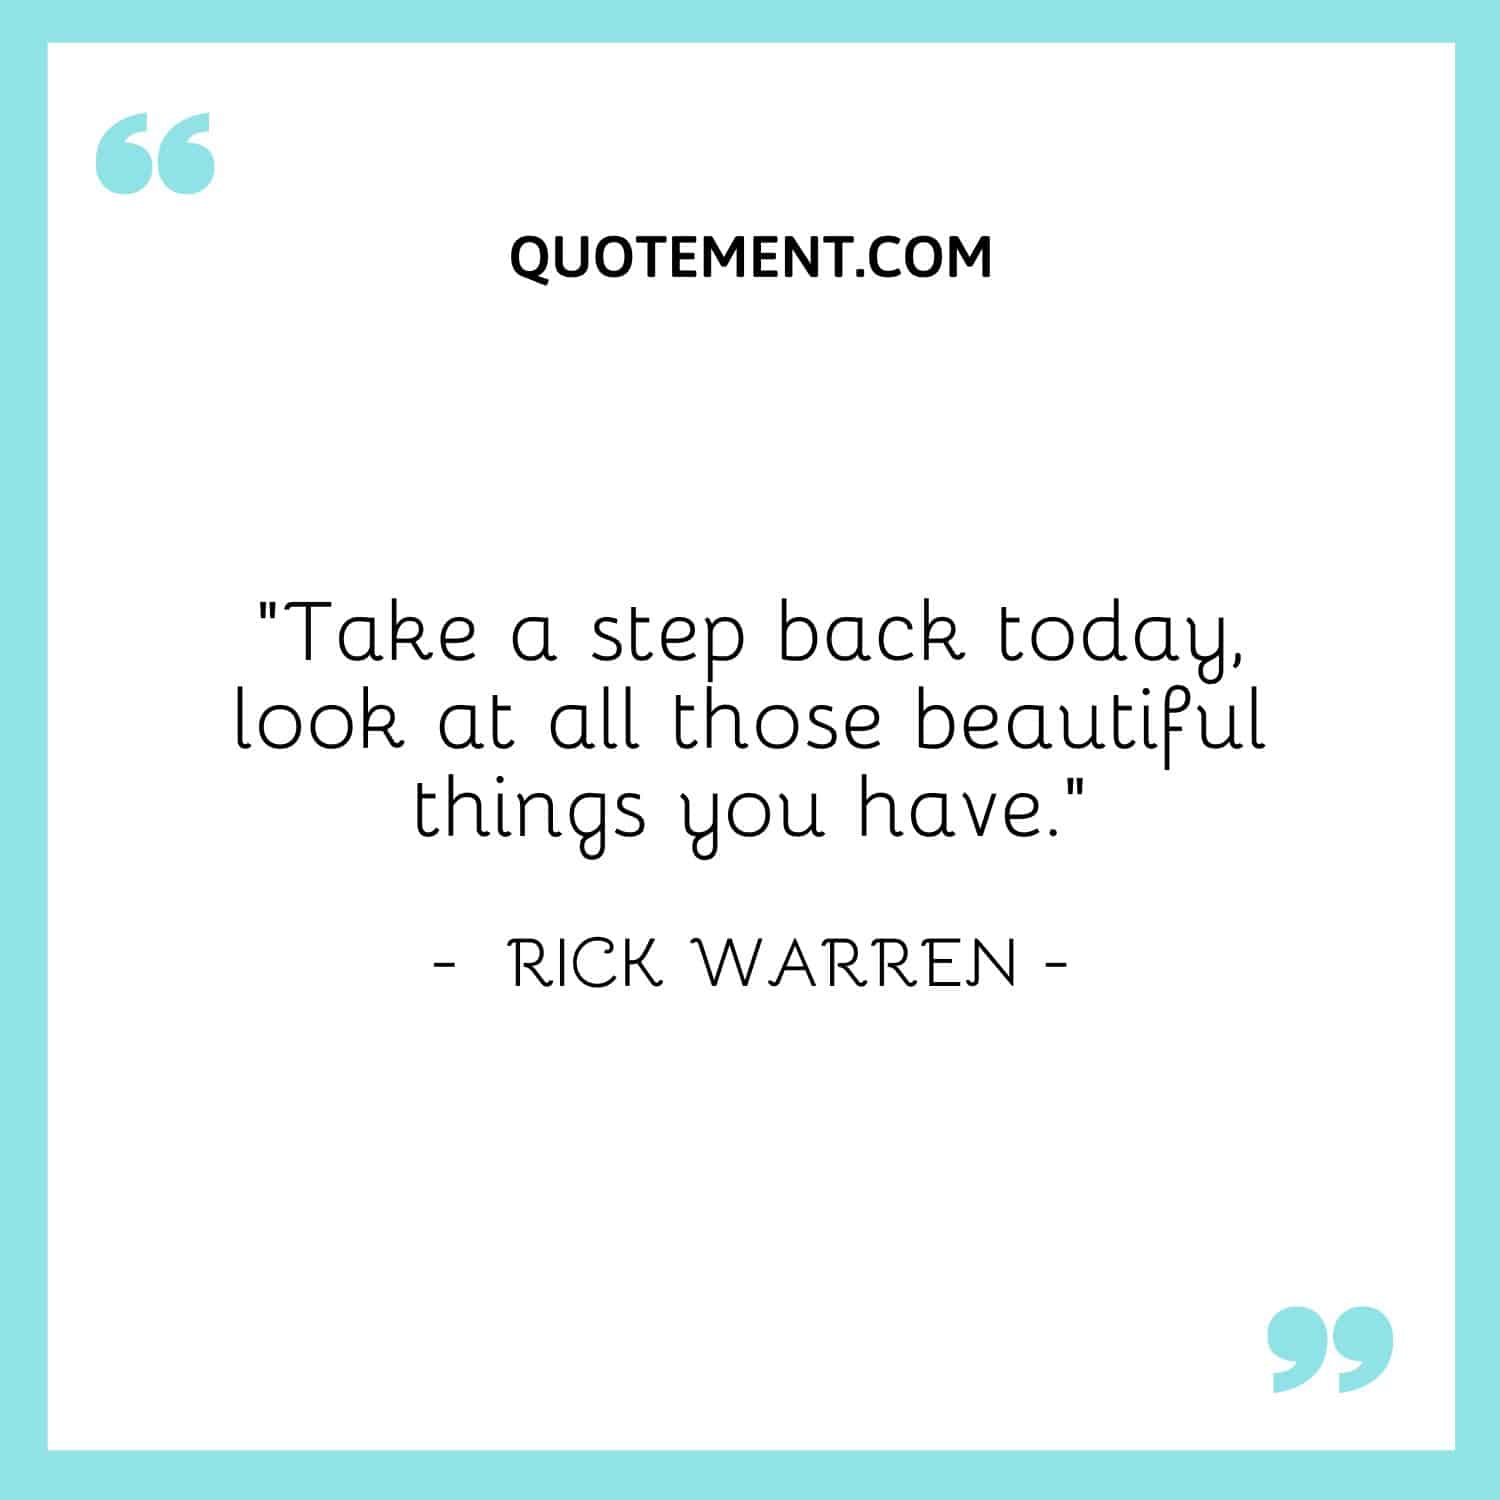 Take a step back today